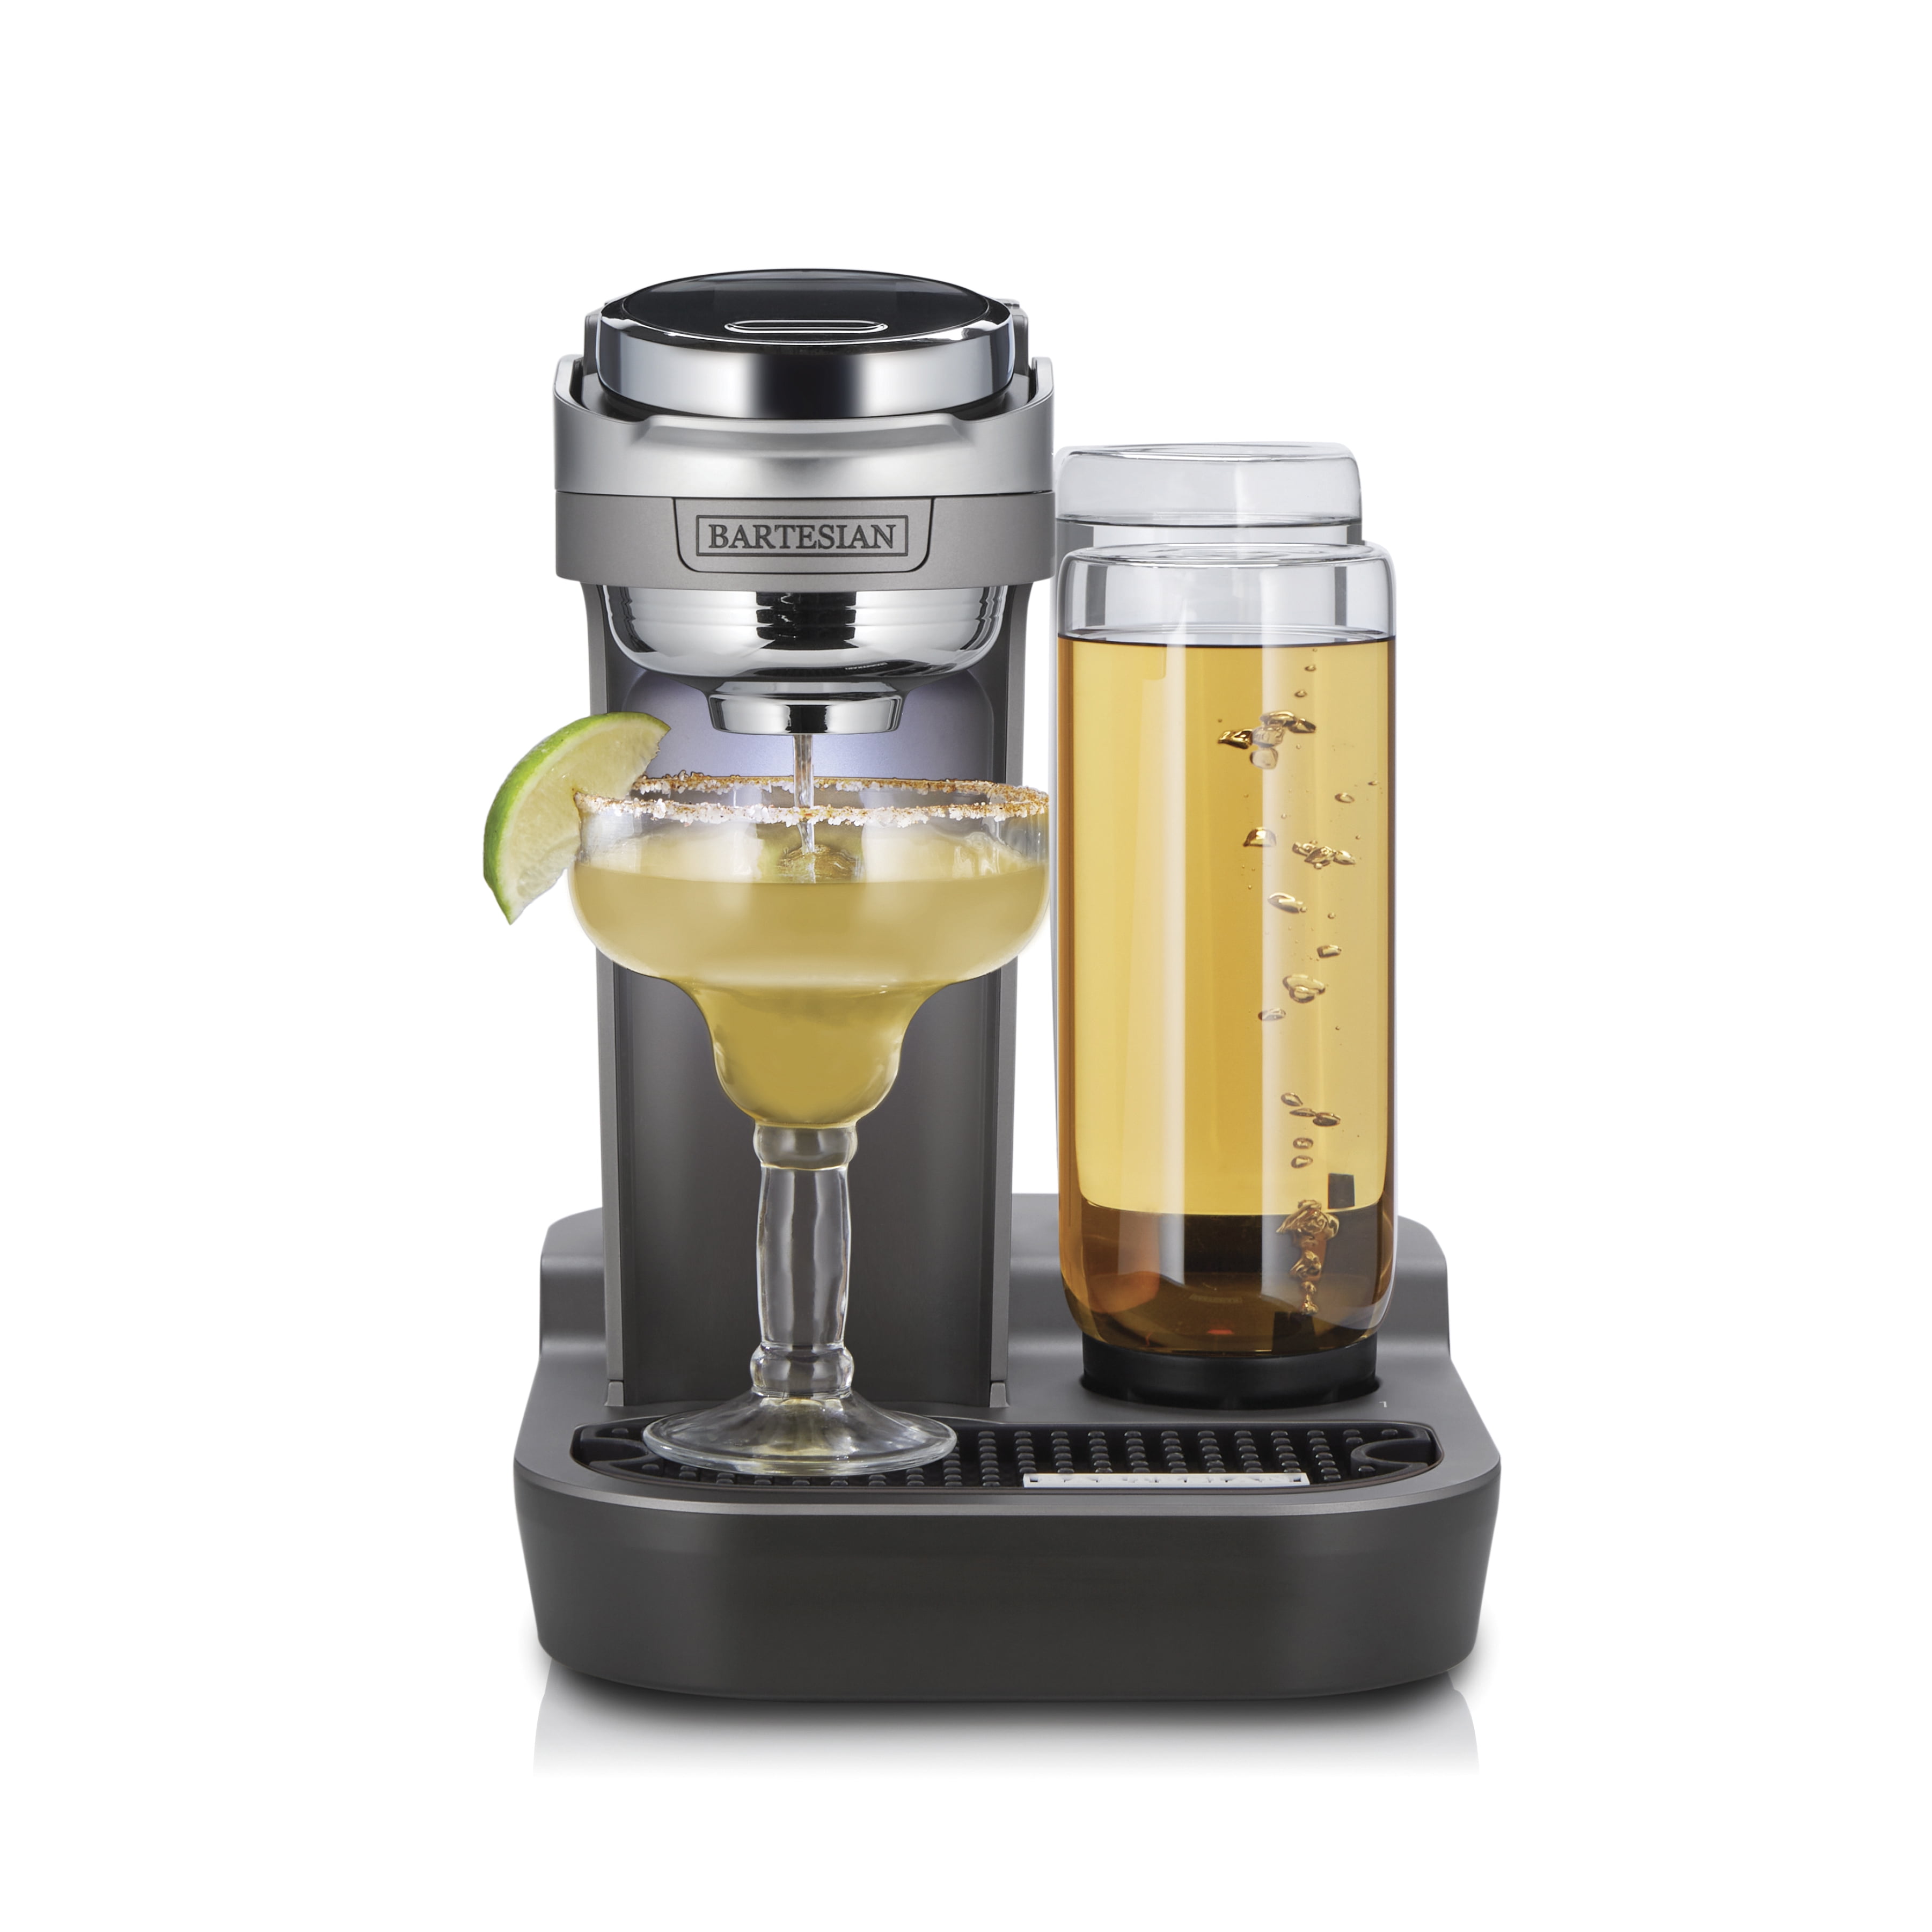 Bartesian premium cocktail maker is discounted for a limited time